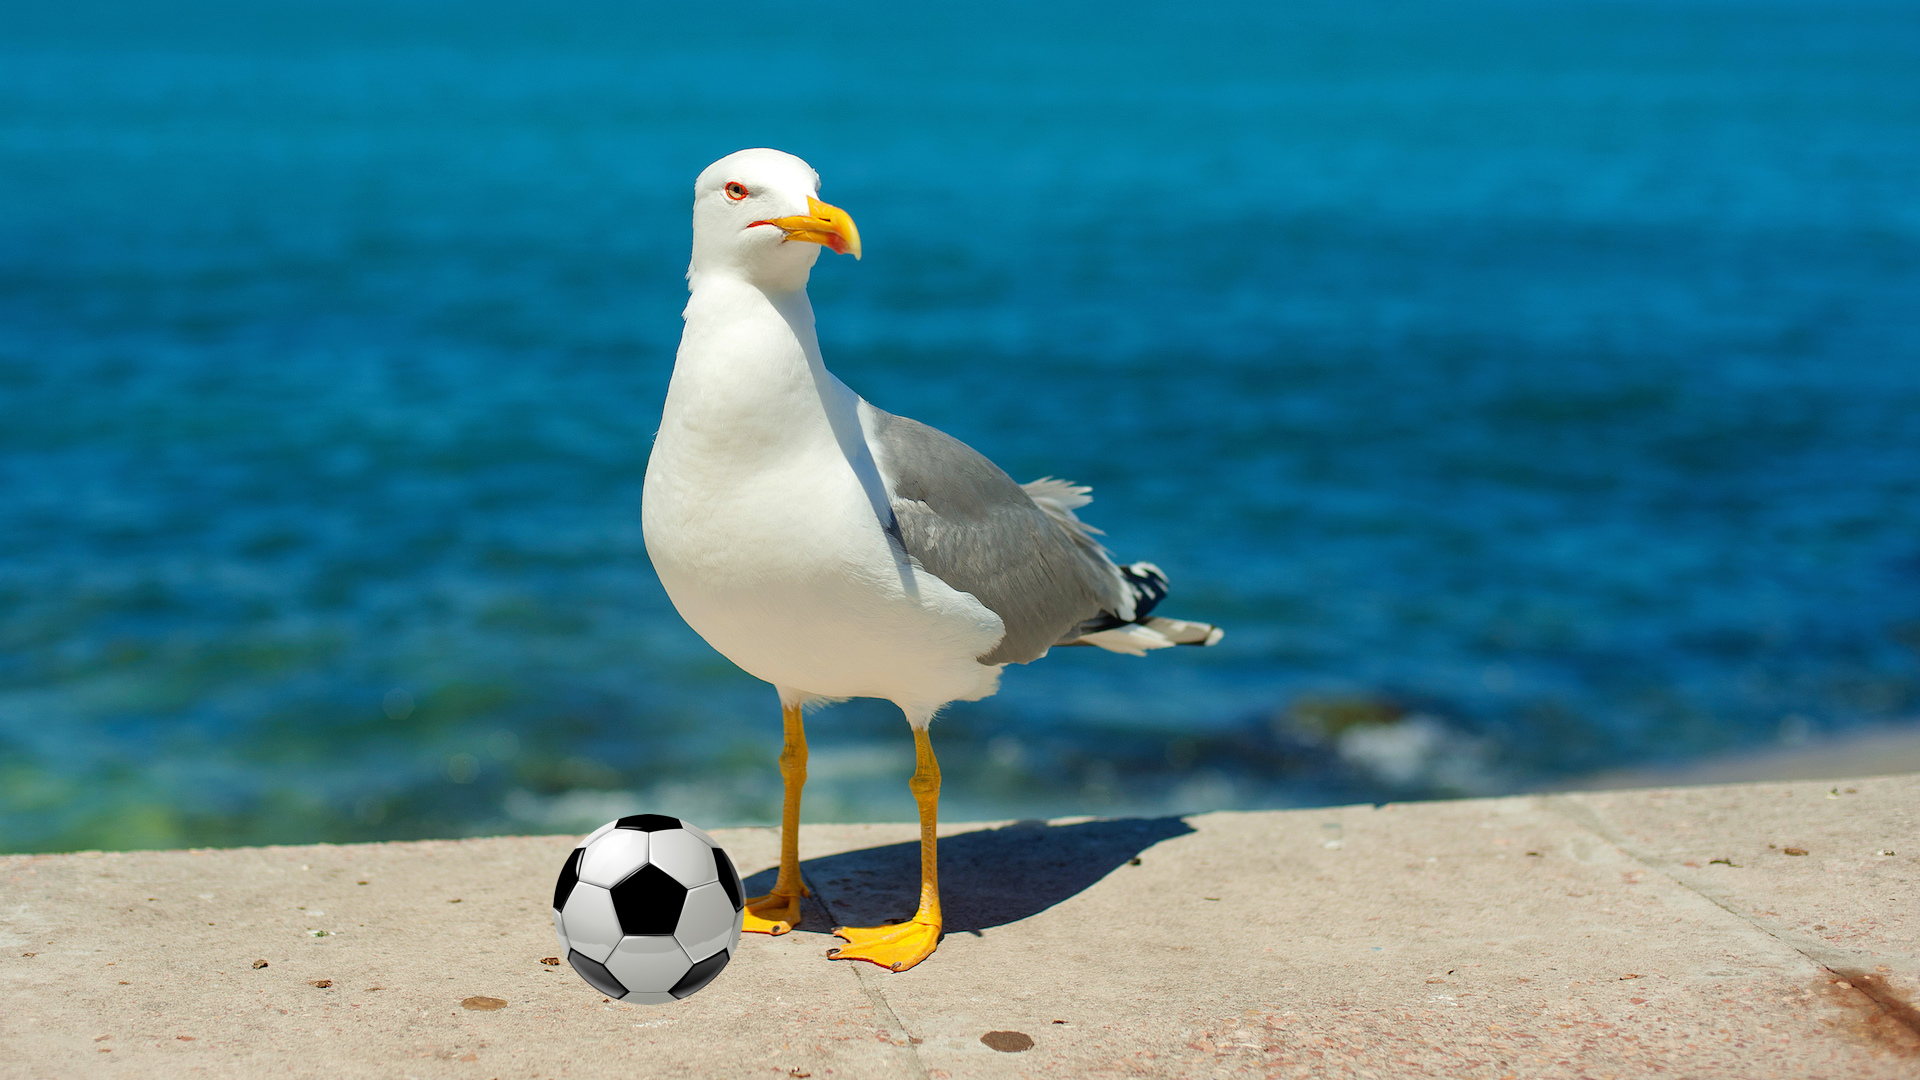 A seagull poses with a football